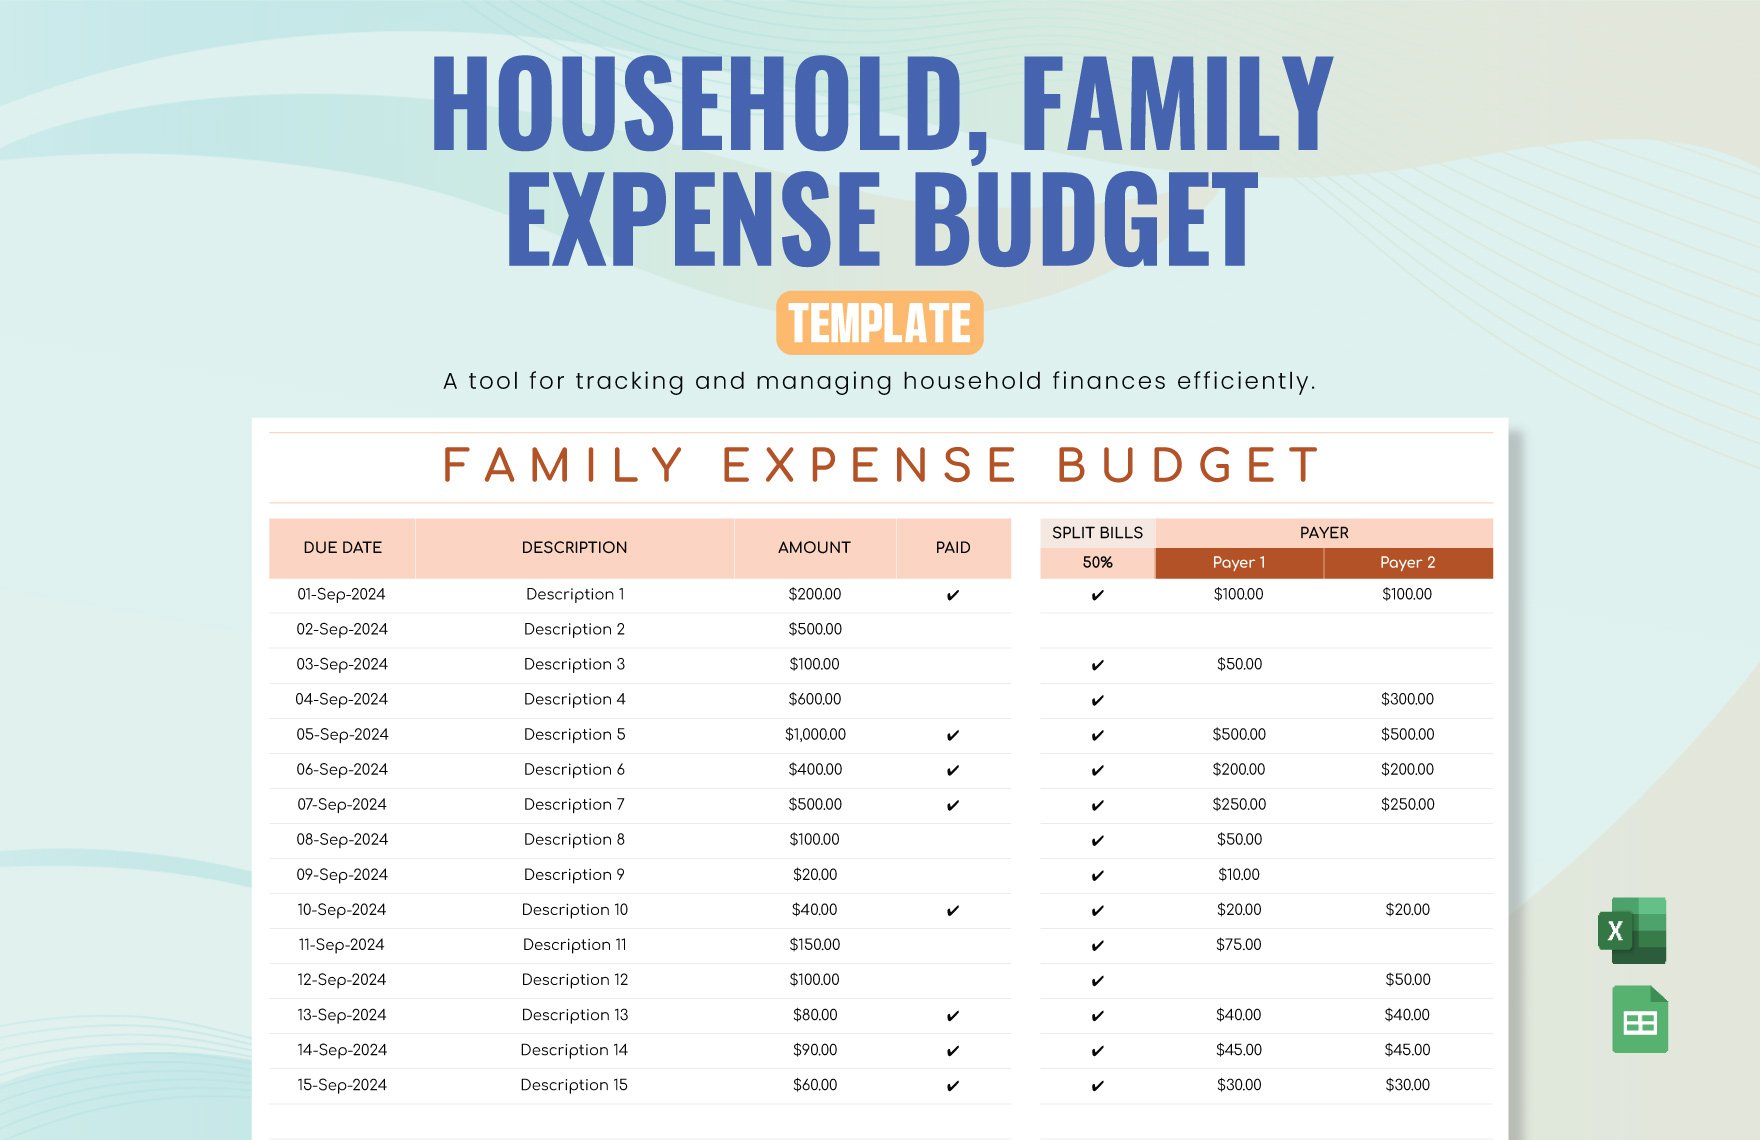 Free House Hold, Family Expense Budget Template